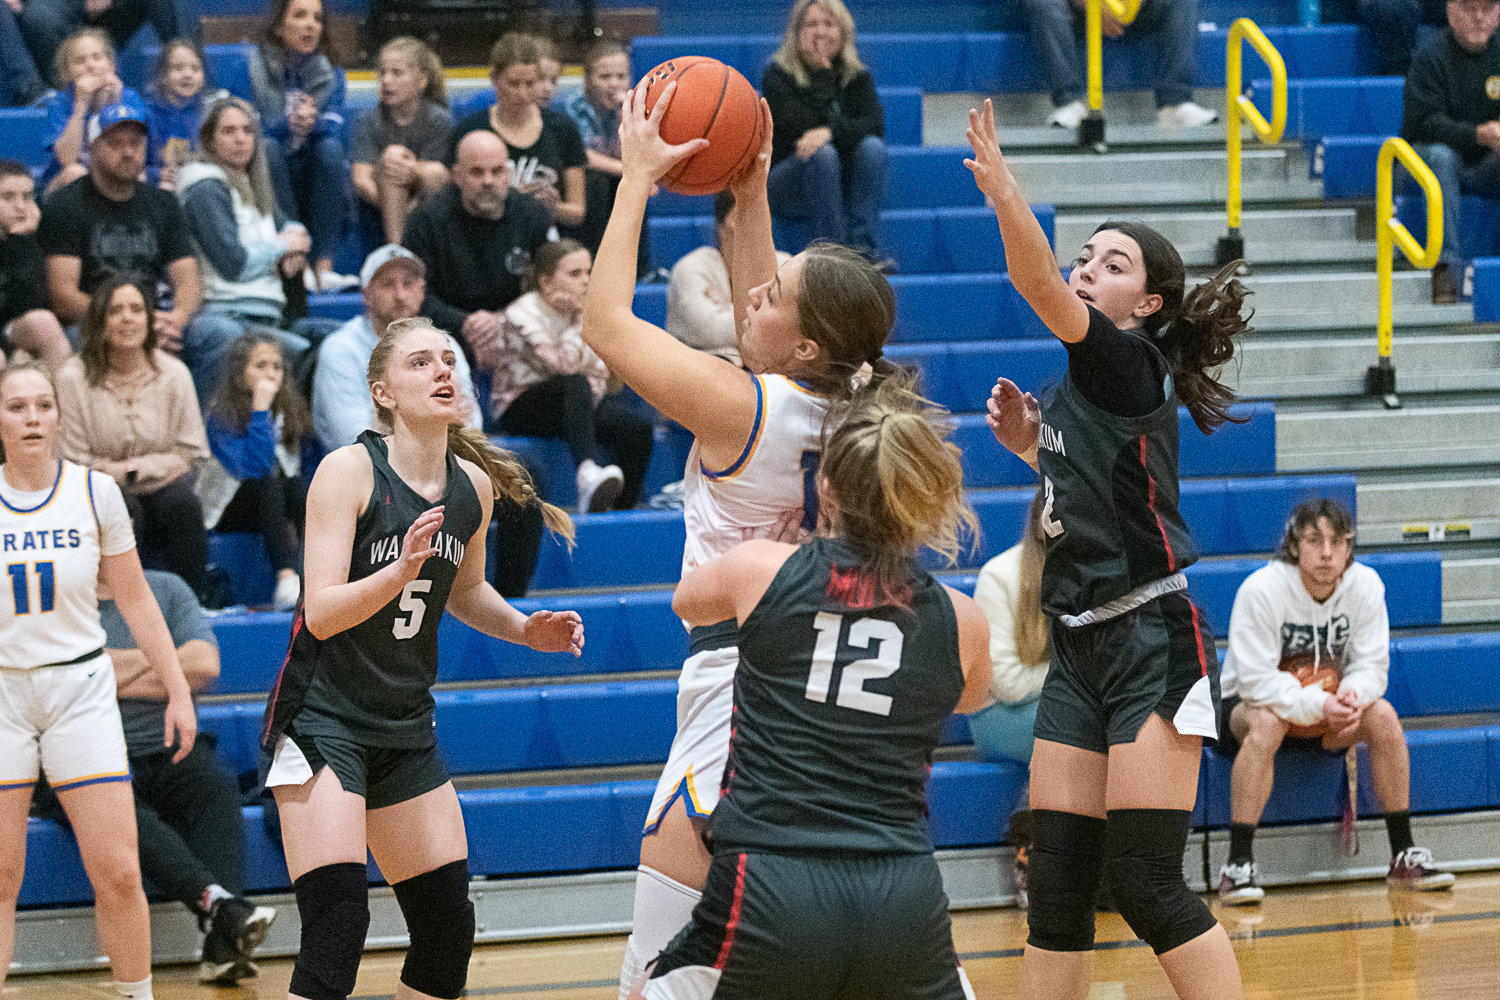 Karlee VonMoos comes down with the ball in the low post during Adna's 72-28 win over Wahkiakum on Jan. 13.